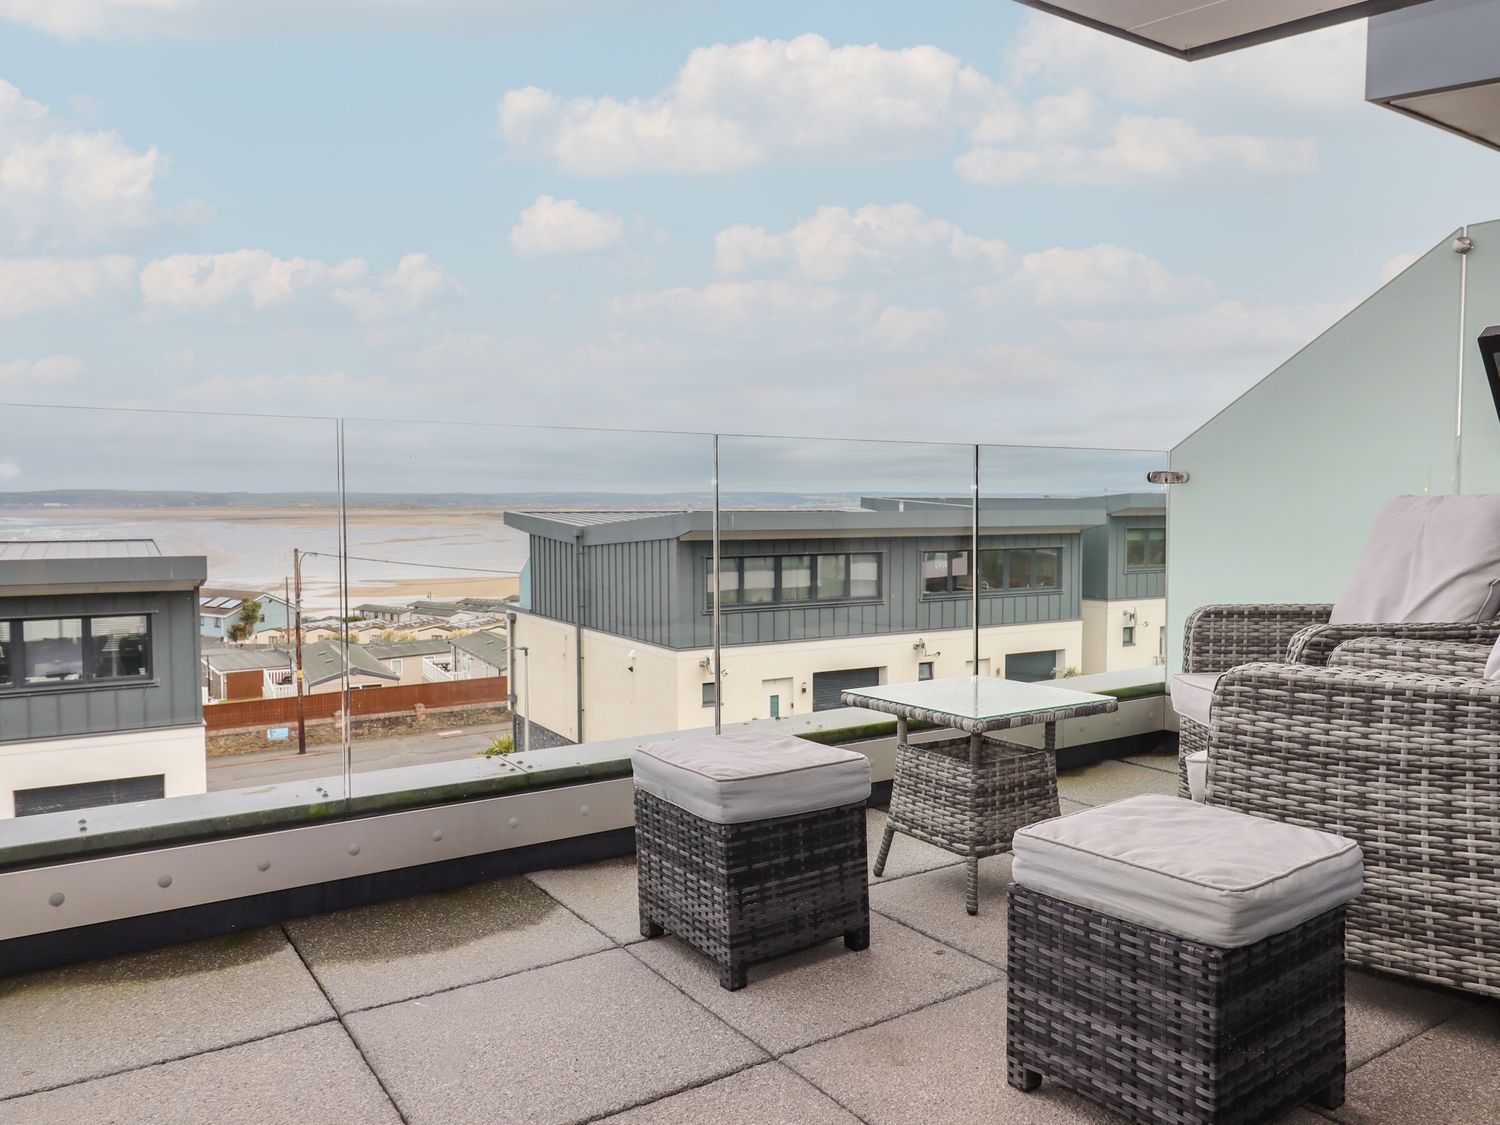 Sunset View in Westward Ho!, Devon. Five-bedroom, stylish home, with sea views. Games room. Hot tub.